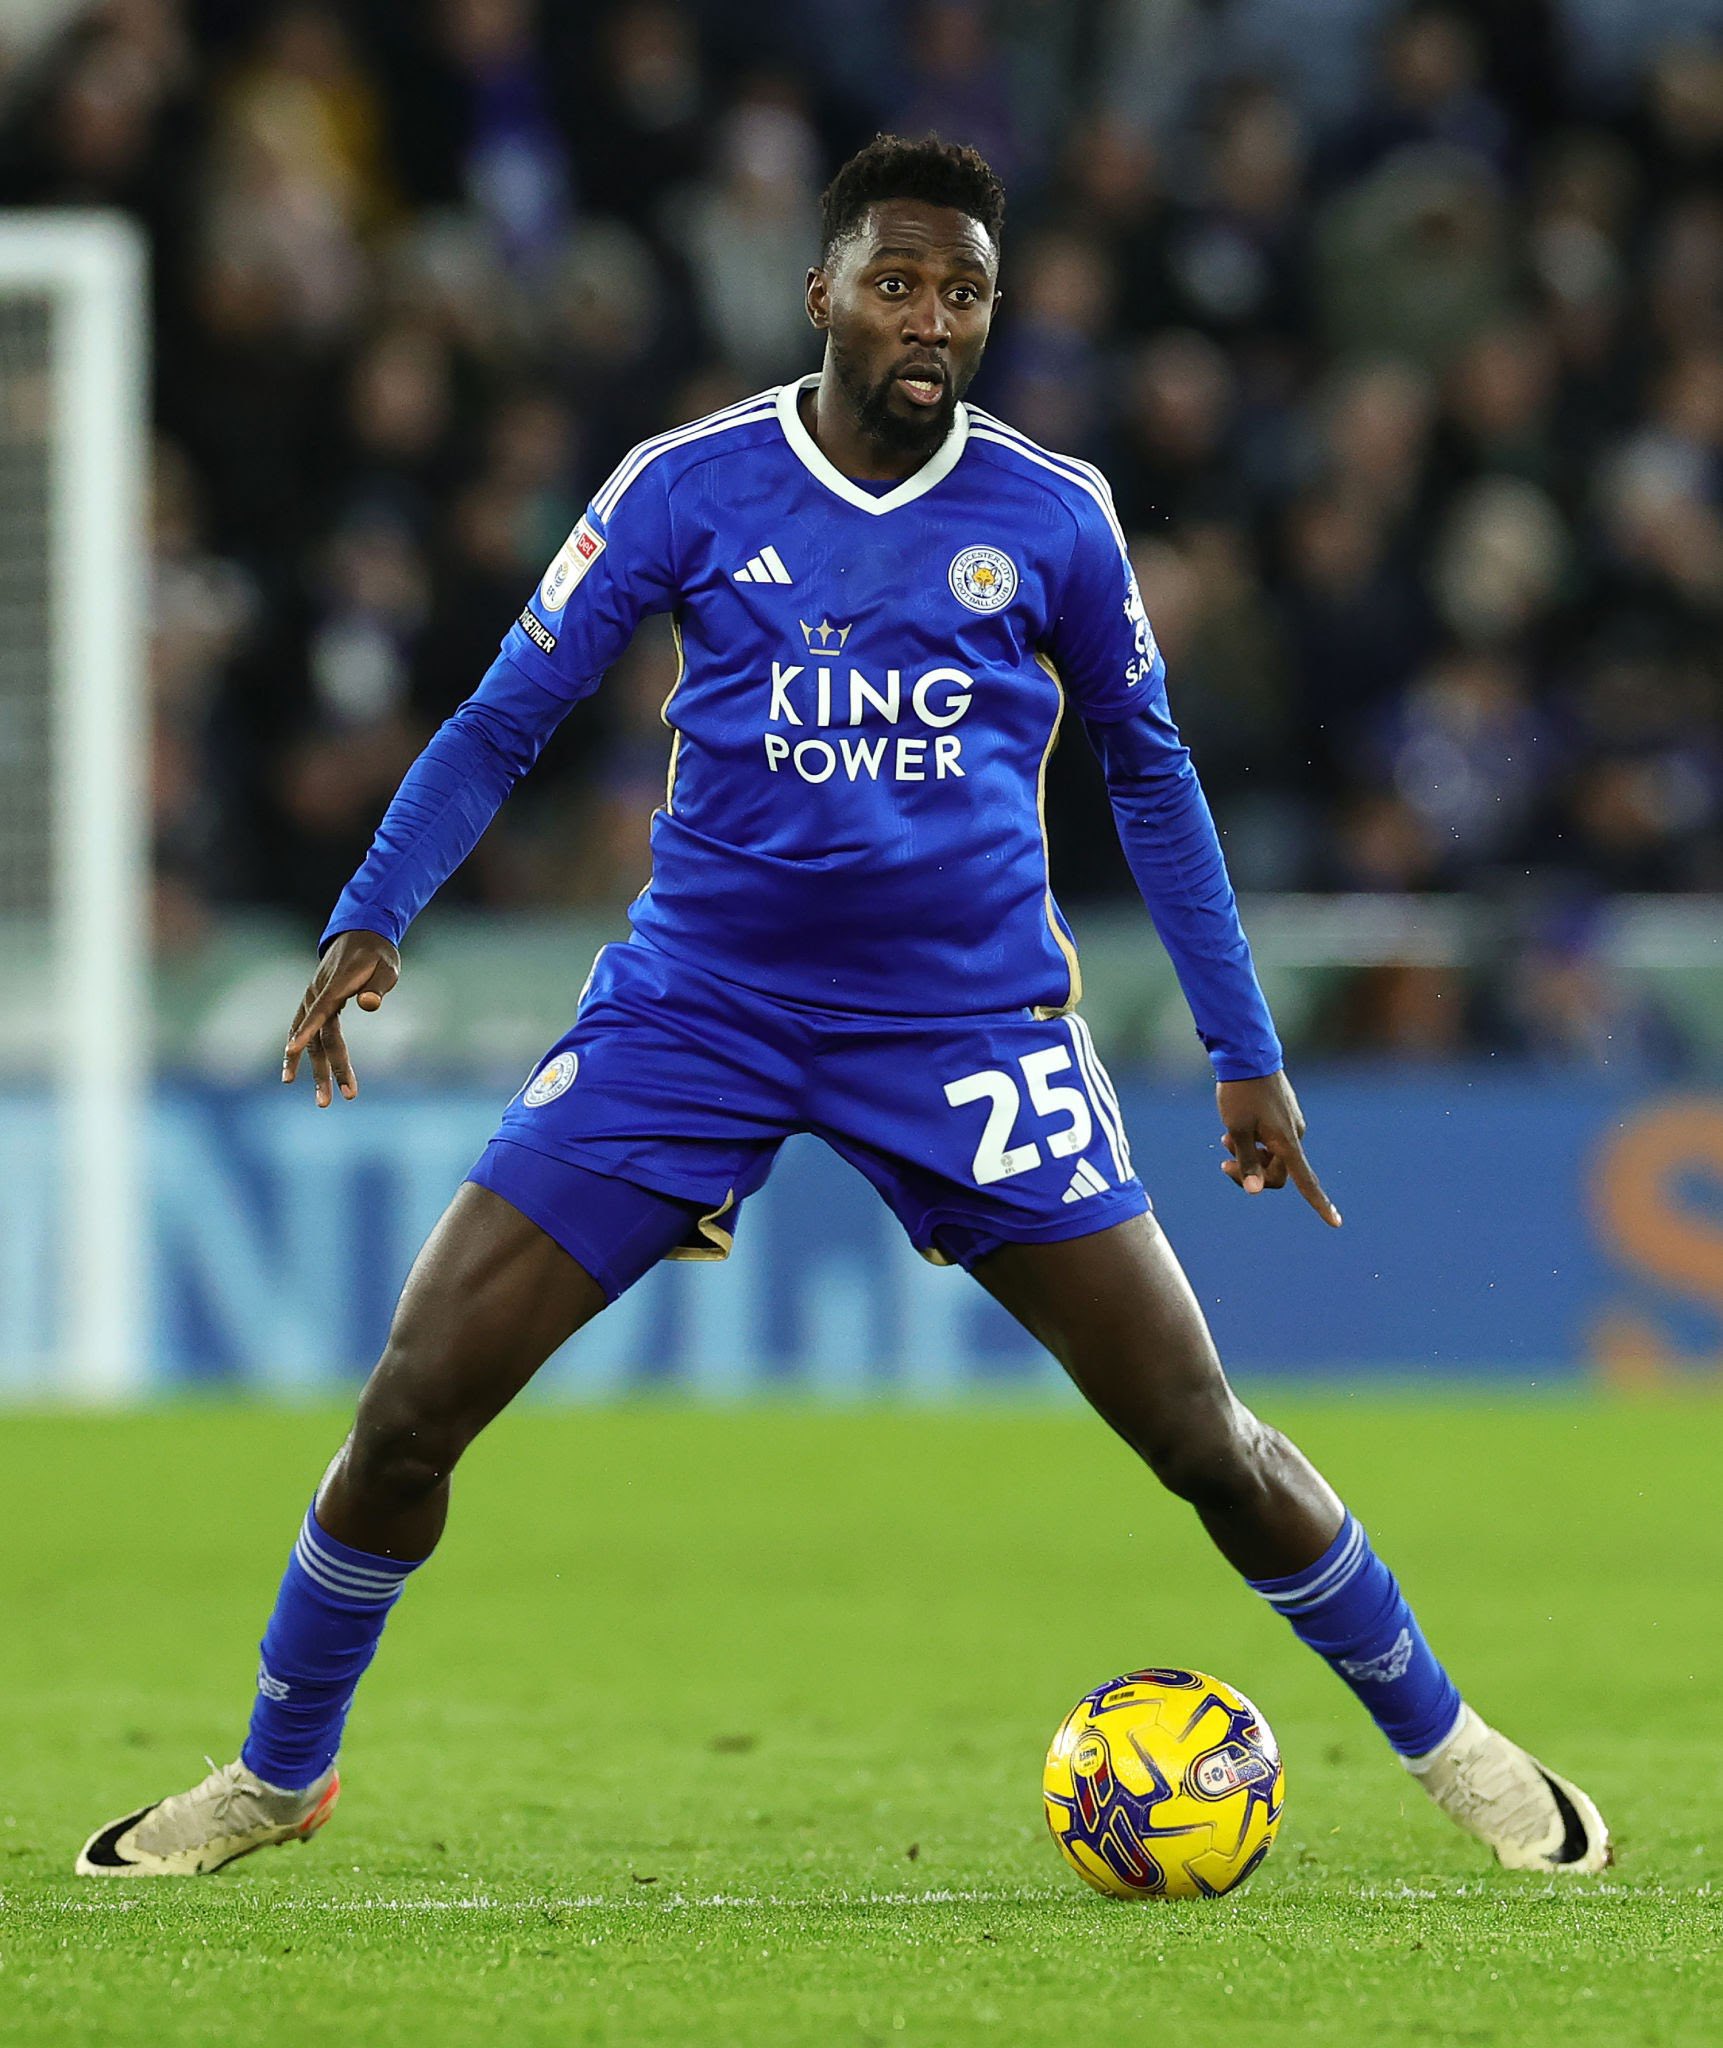 EFL: Leicester City boss delighted as Ndidi makes triumphant return